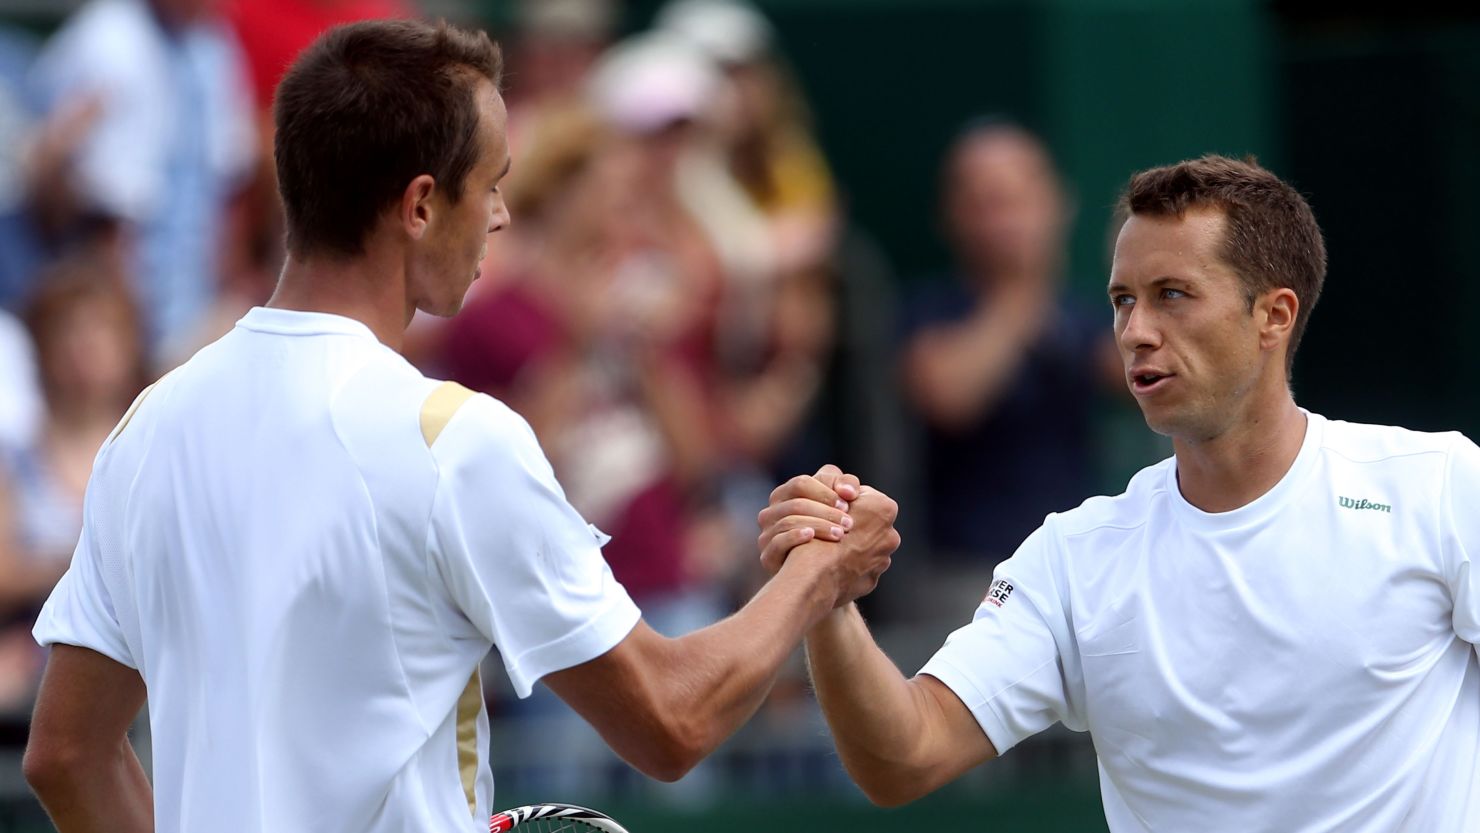 Lukas Rosol (left) shakes hands with Philipp Kohlschreiber after losing to the German in the third round at Wimbledon.